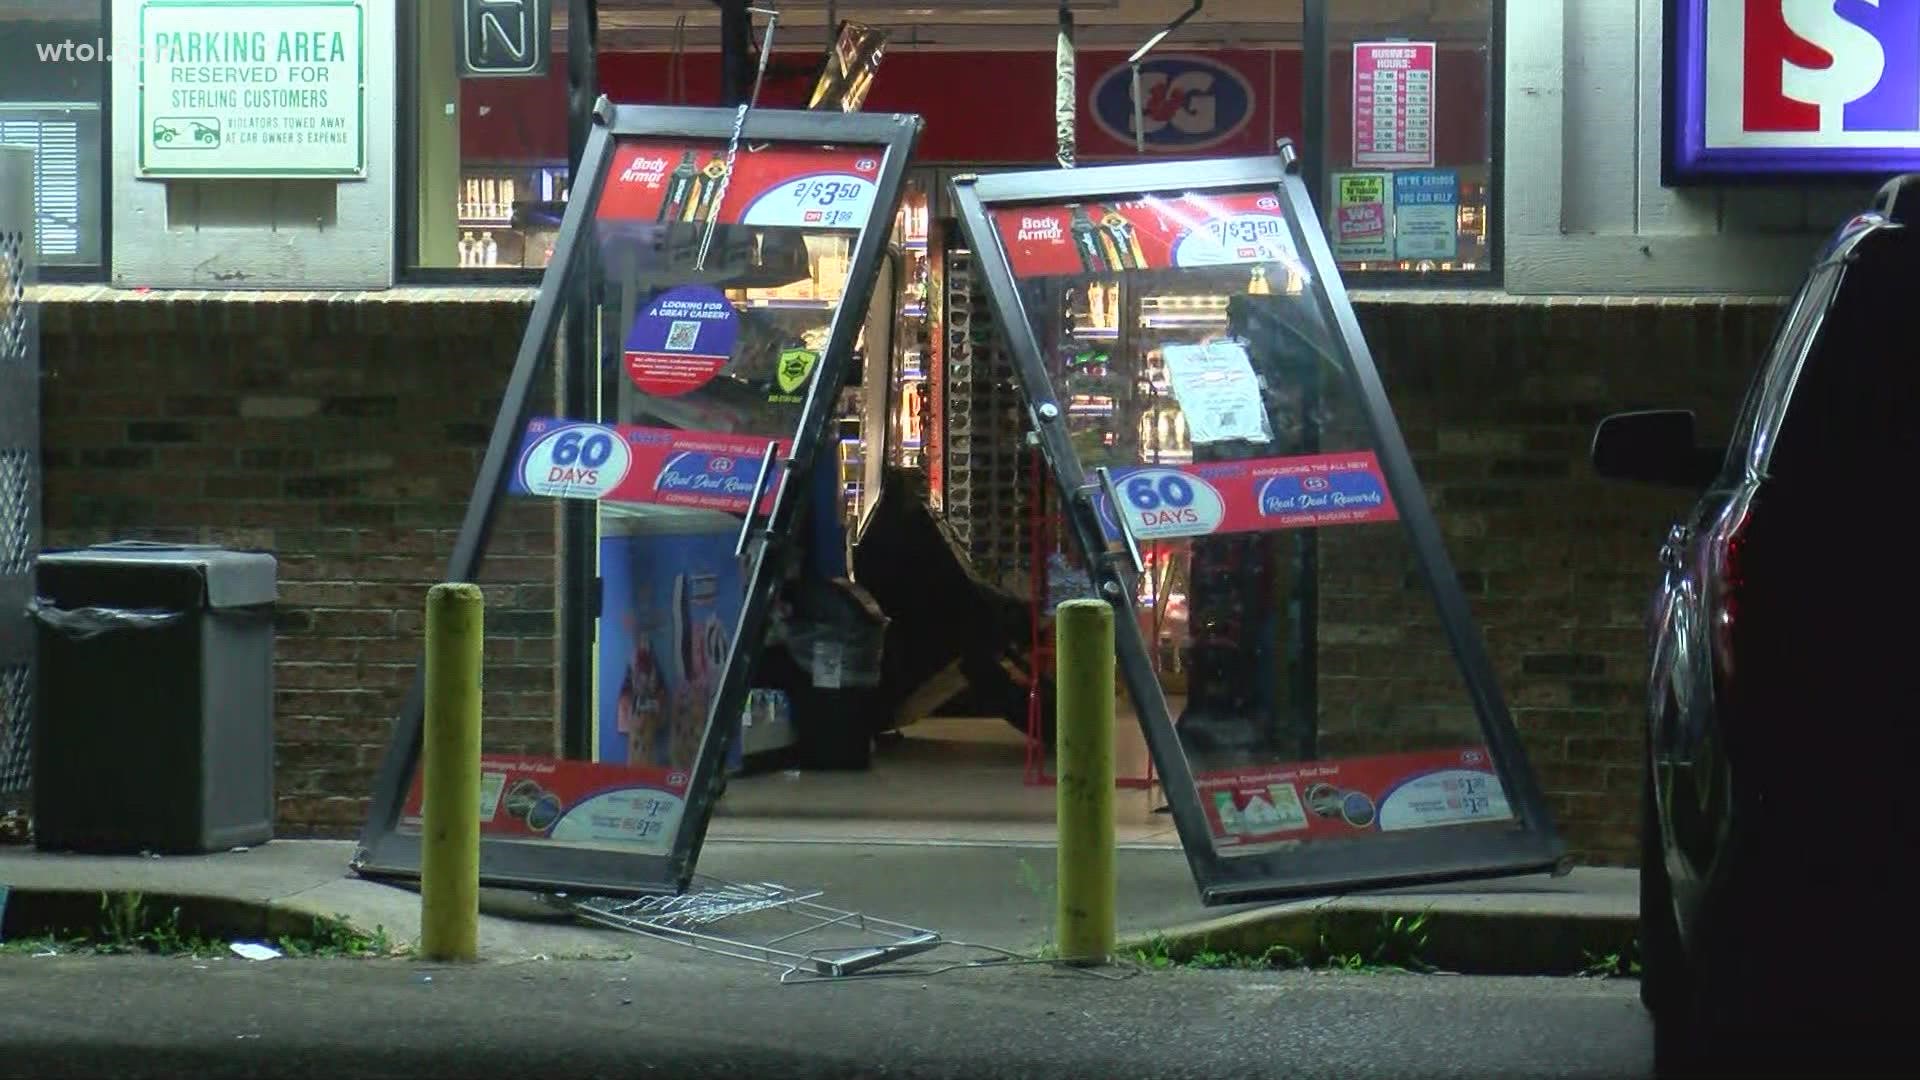 Another smash and grab happened just down the road at a Stop & Go.